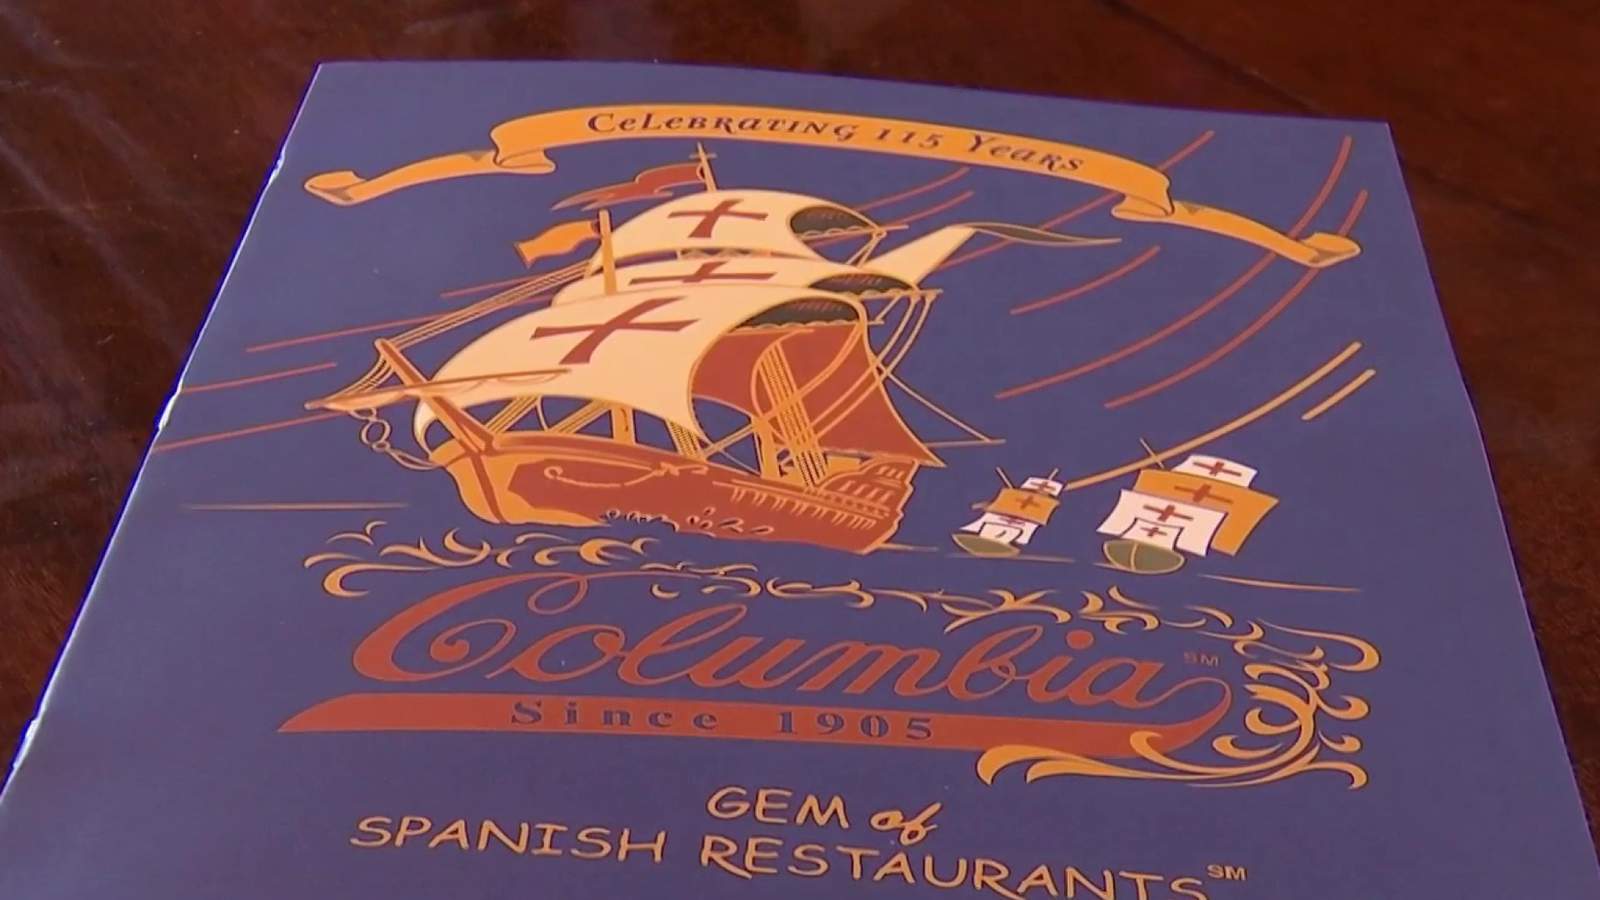 Florida’s oldest restaurant also holds the title for largest Spanish restaurant in U.S.